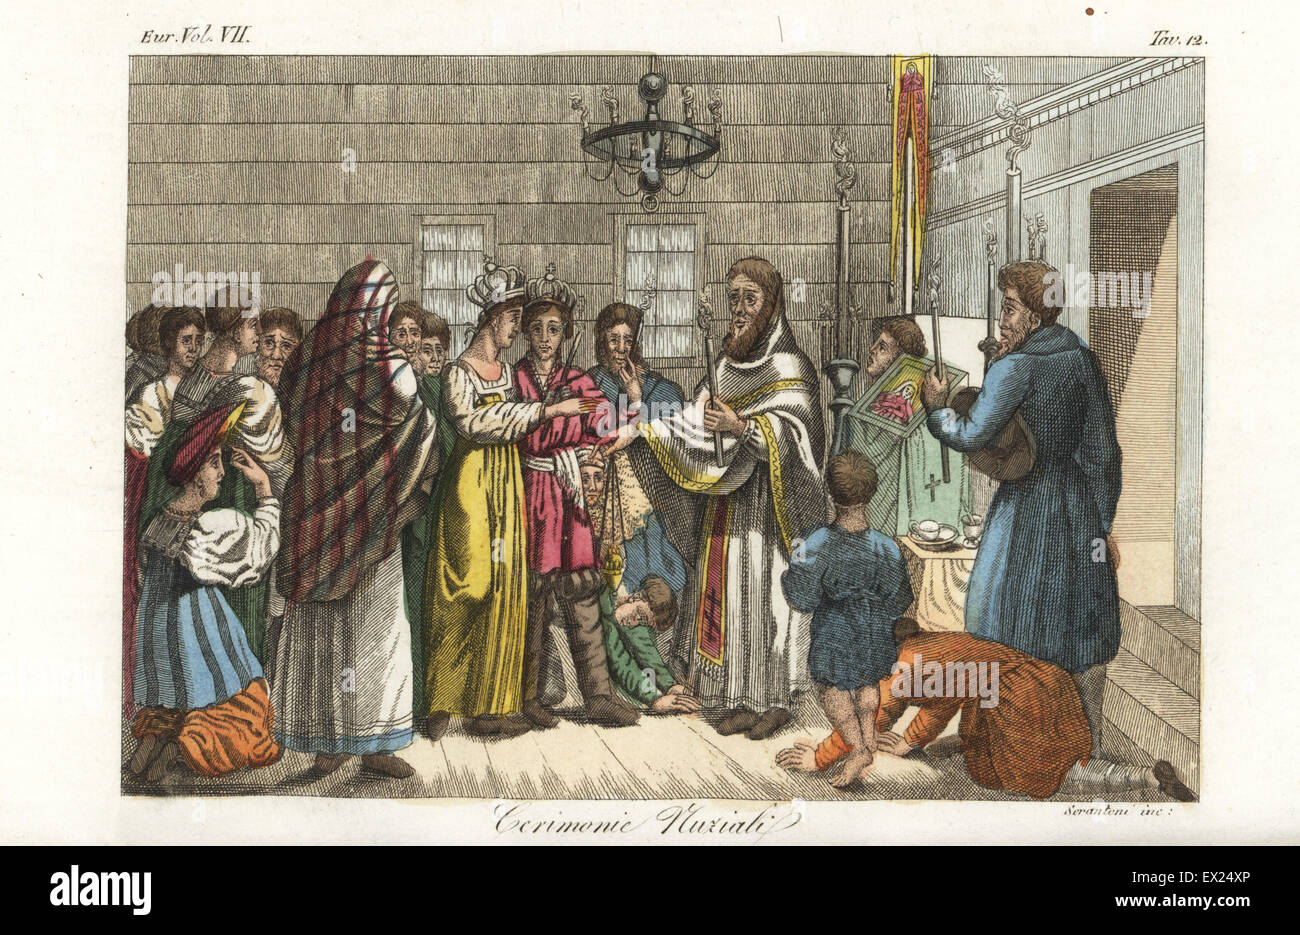 Marriage ceremony in Russia with bride and groom in crowns holding torches taking vows before an Orthodox priest. Handcoloured copperplate engraving by Seratoni from Giulio Ferrario's Costumes Ancient and Modern of the Peoples of the World, Florence, 1847. Stock Photo